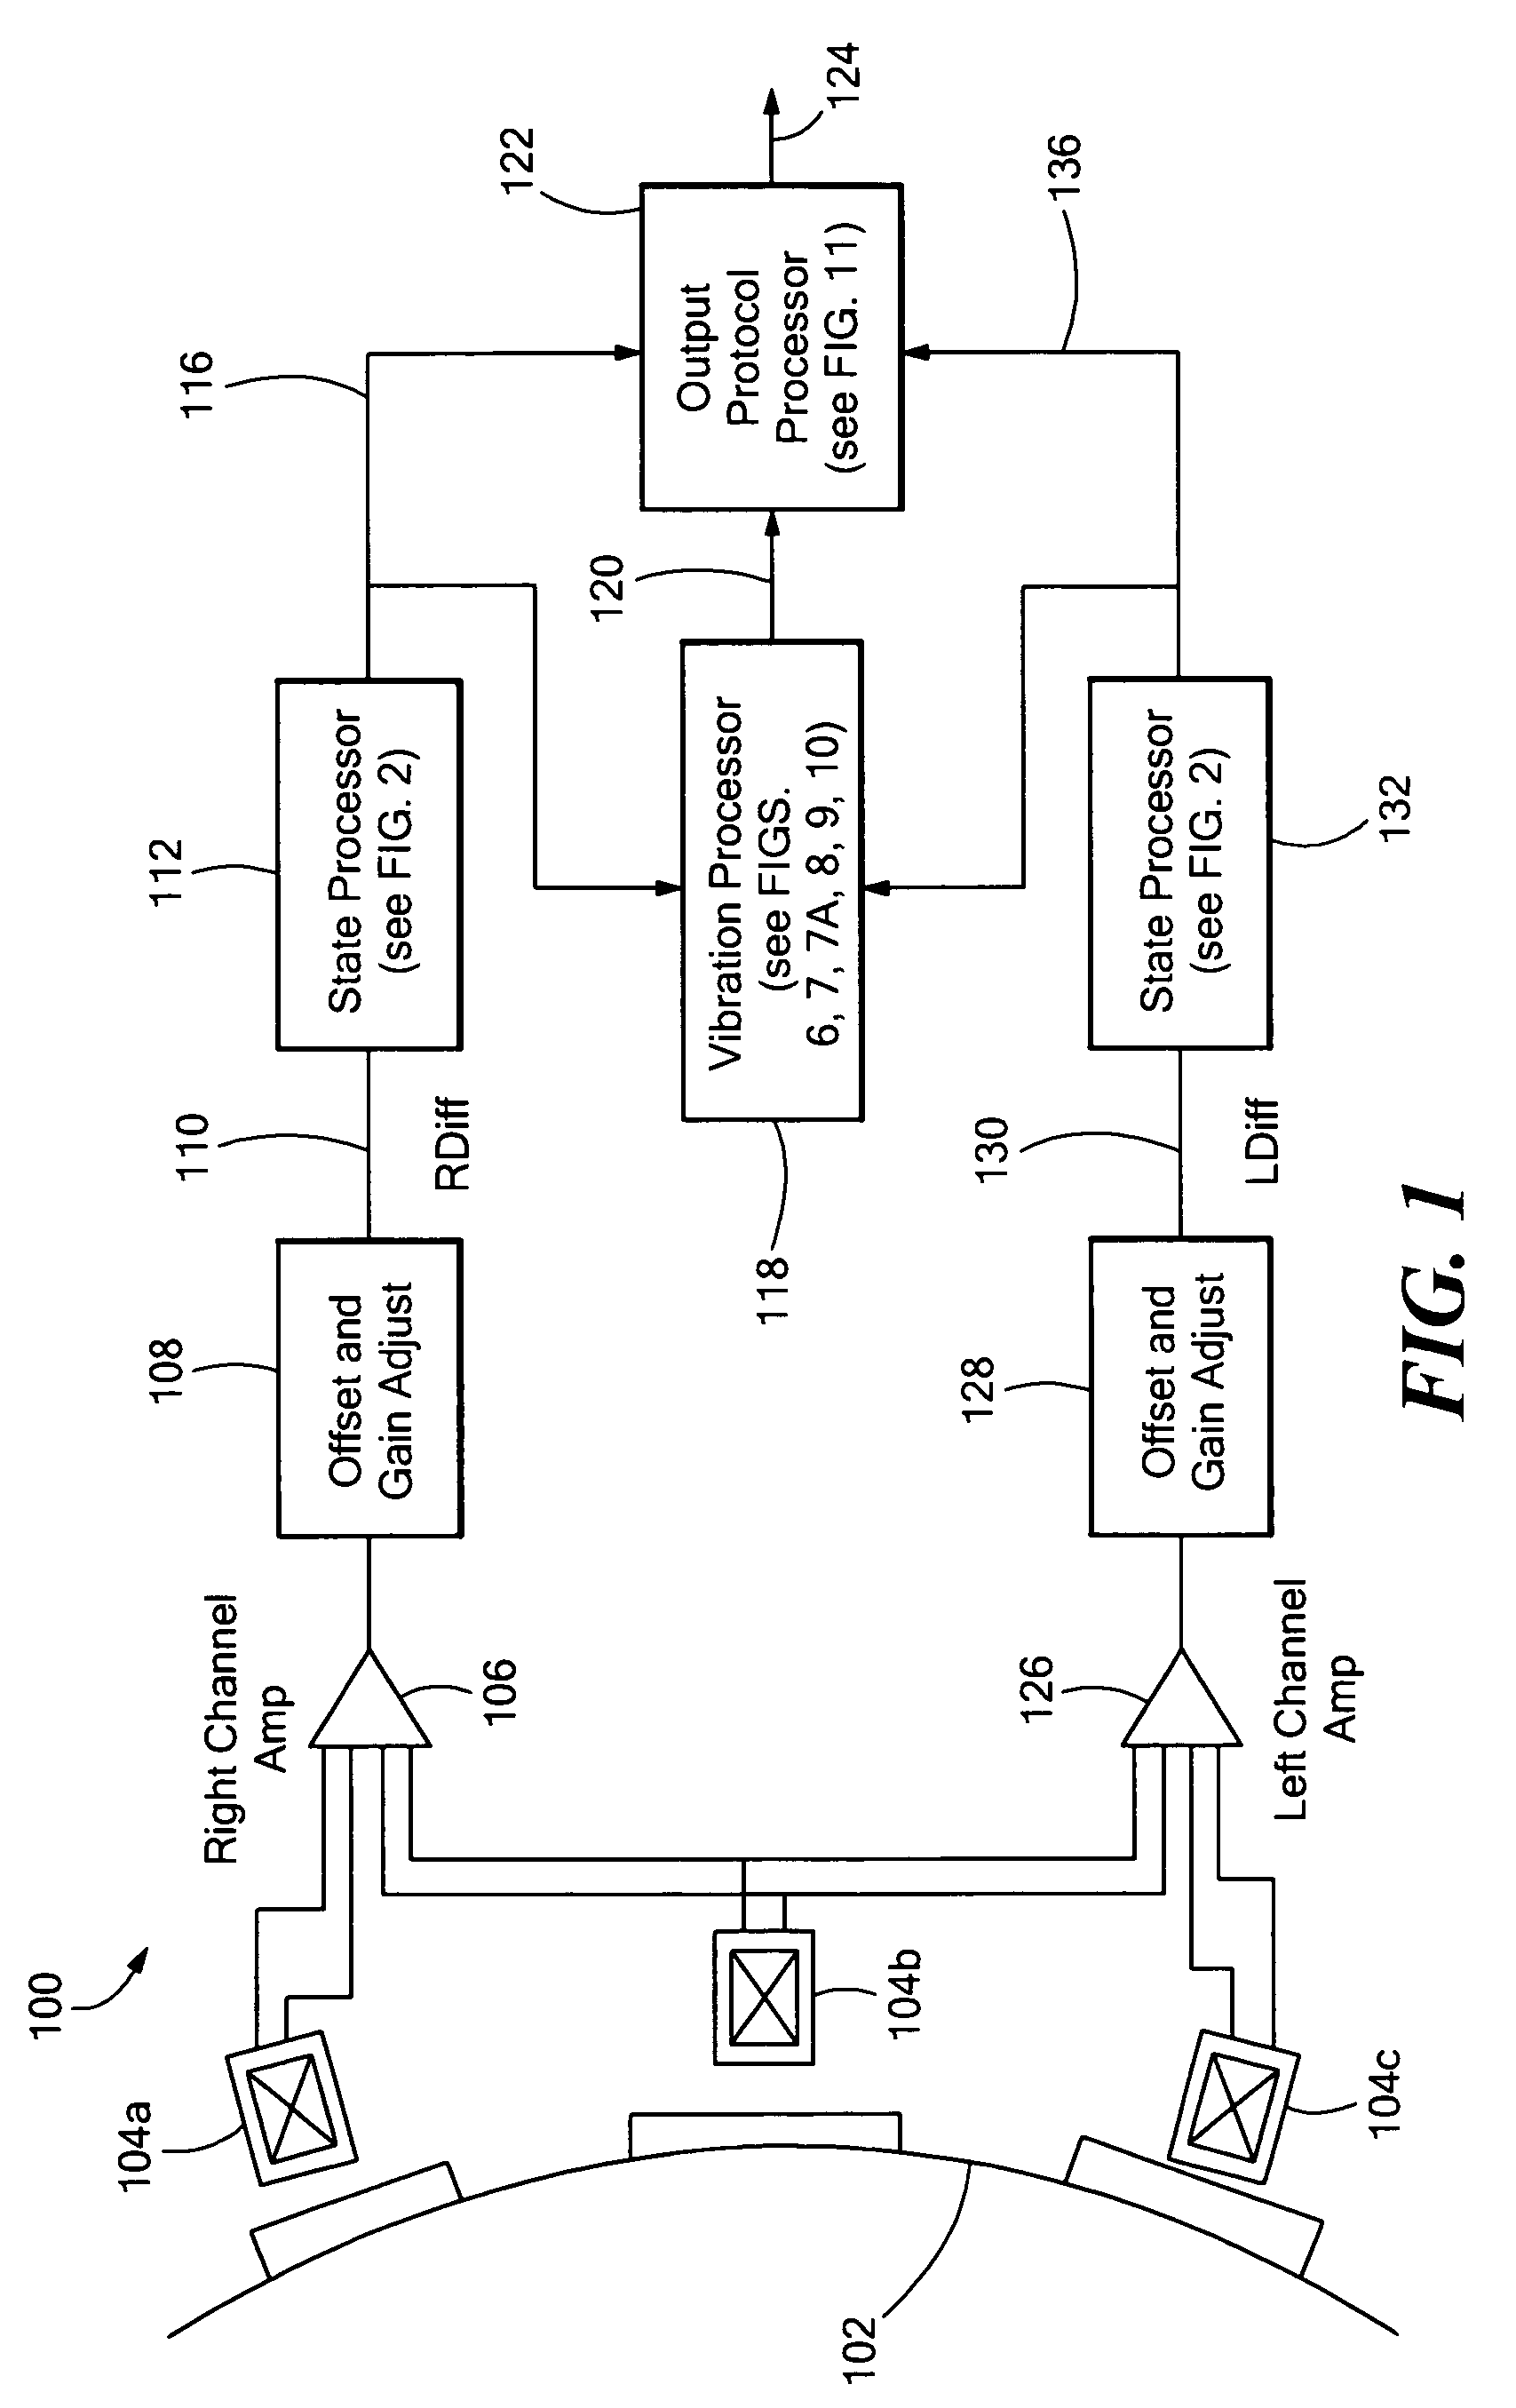 Proximity detector having a sequential flow state machine